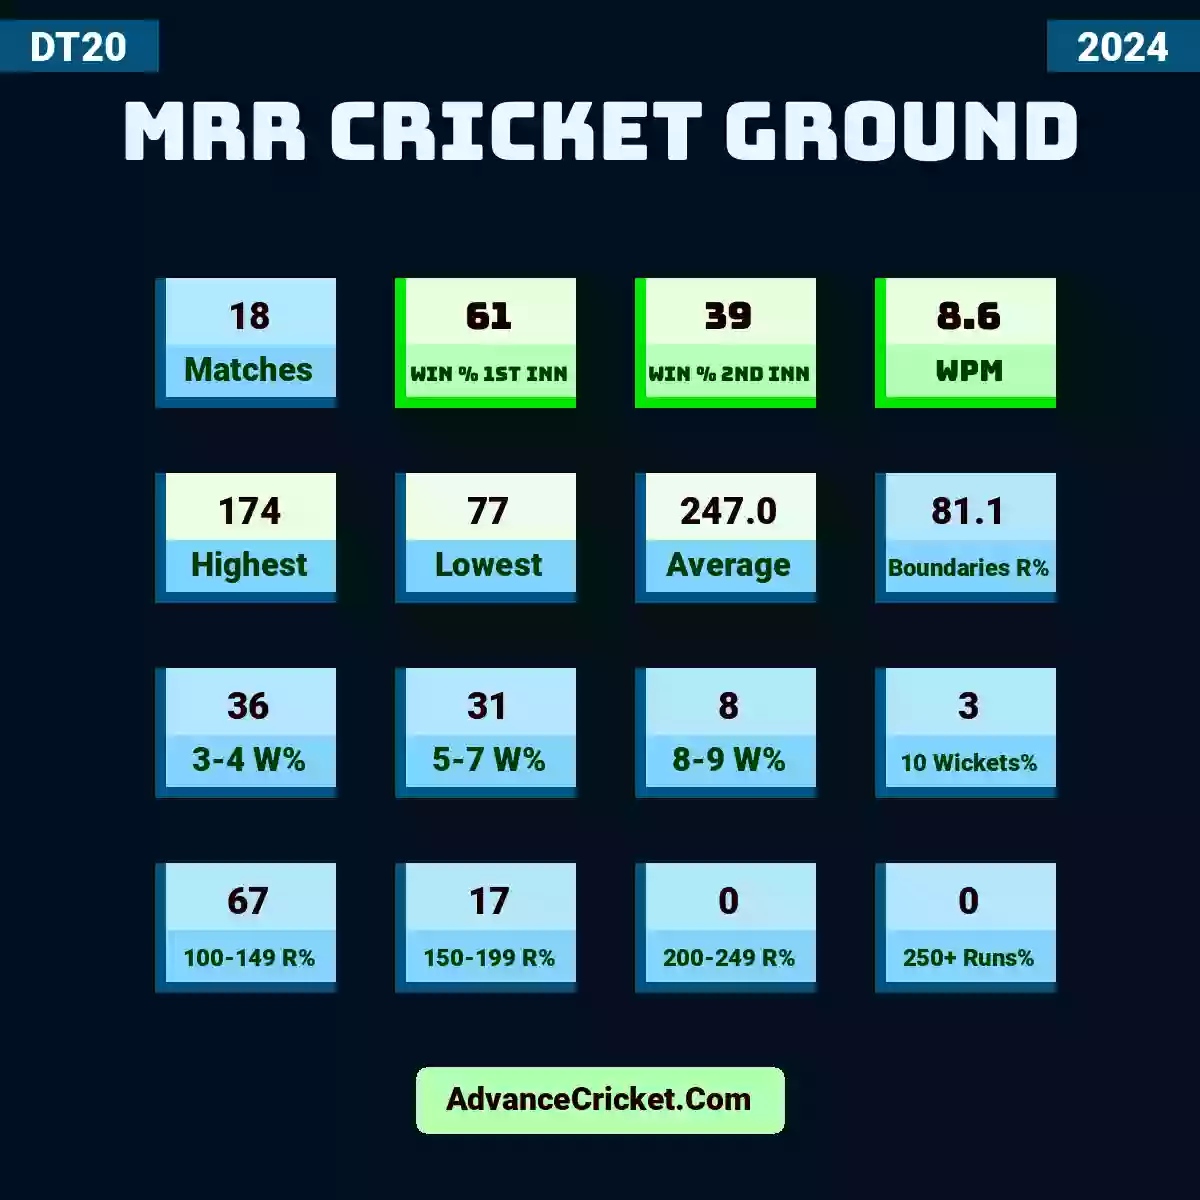 Image showing MRR Cricket Ground with Matches: 18, Win % 1st Inn: 61, Win % 2nd Inn: 39, WPM: 8.6, Highest: 174, Lowest: 77, Average: 247.0, Boundaries R%: 81.1, 3-4 W%: 36, 5-7 W%: 31, 8-9 W%: 8, 10 Wickets%: 3, 100-149 R%: 67, 150-199 R%: 17, 200-249 R%: 0, 250+ Runs%: 0.